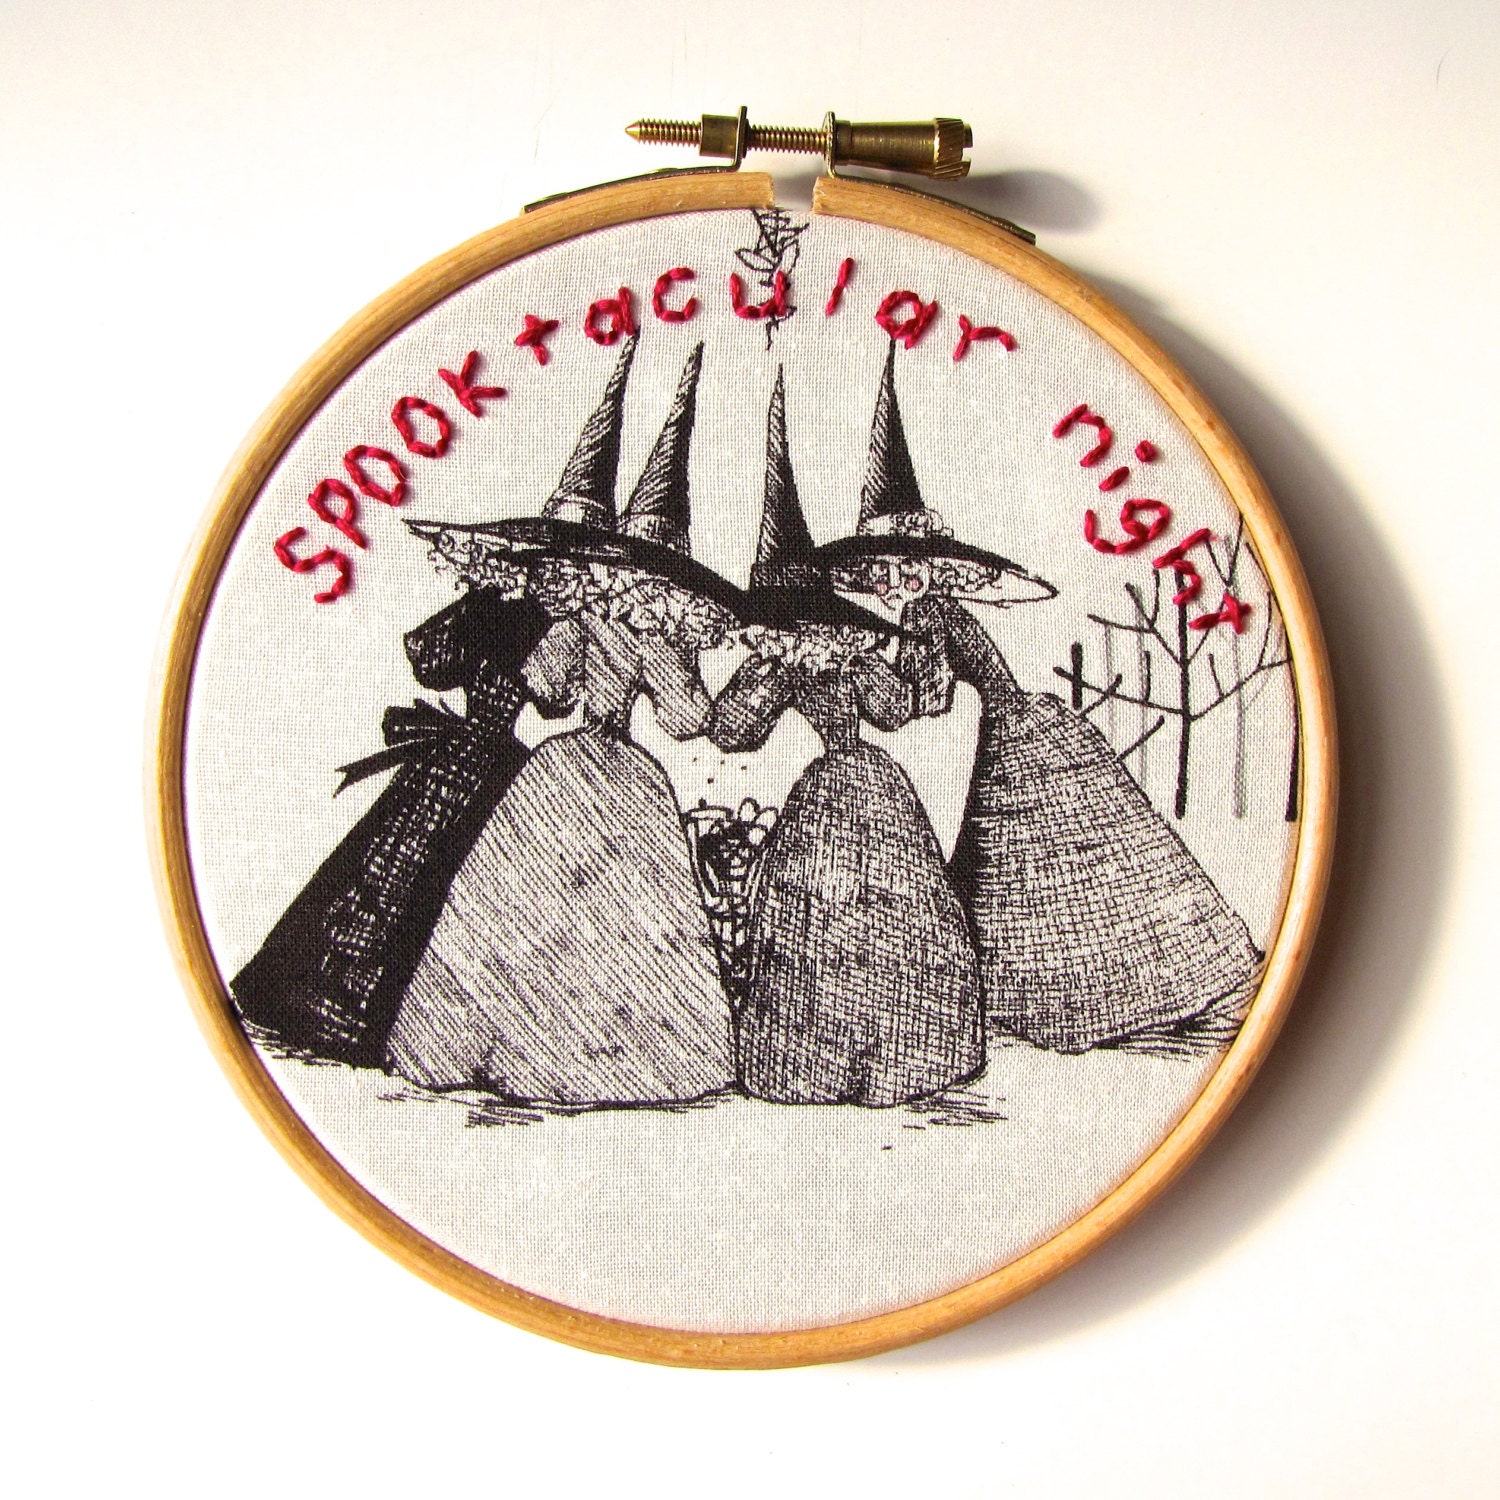 Spooktacular Halloween Picture. Fun Embroidery Art. in Black and White. Spooktacular night. 5 x 5 Inch Hoop by mirrymirry